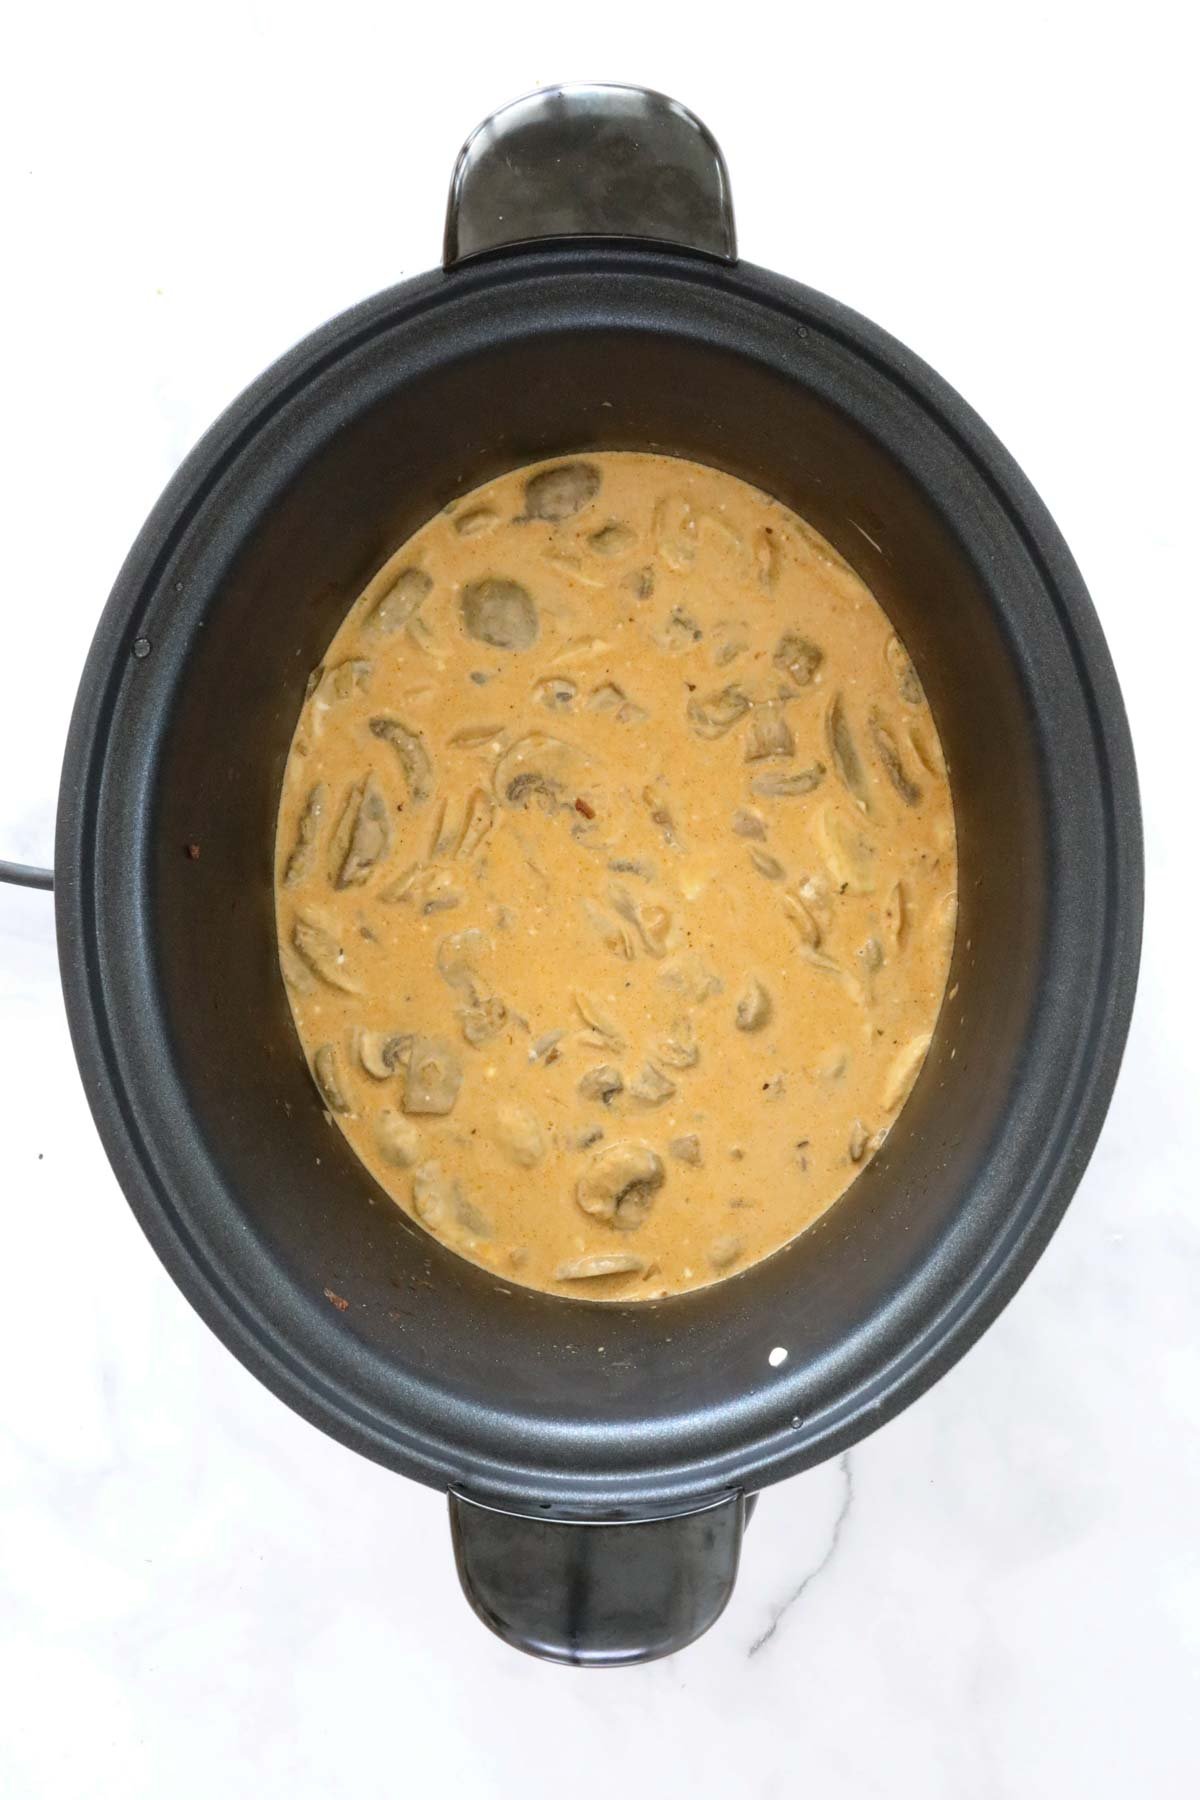 A creamy beef and mushroom dish simmering in slow cooker.